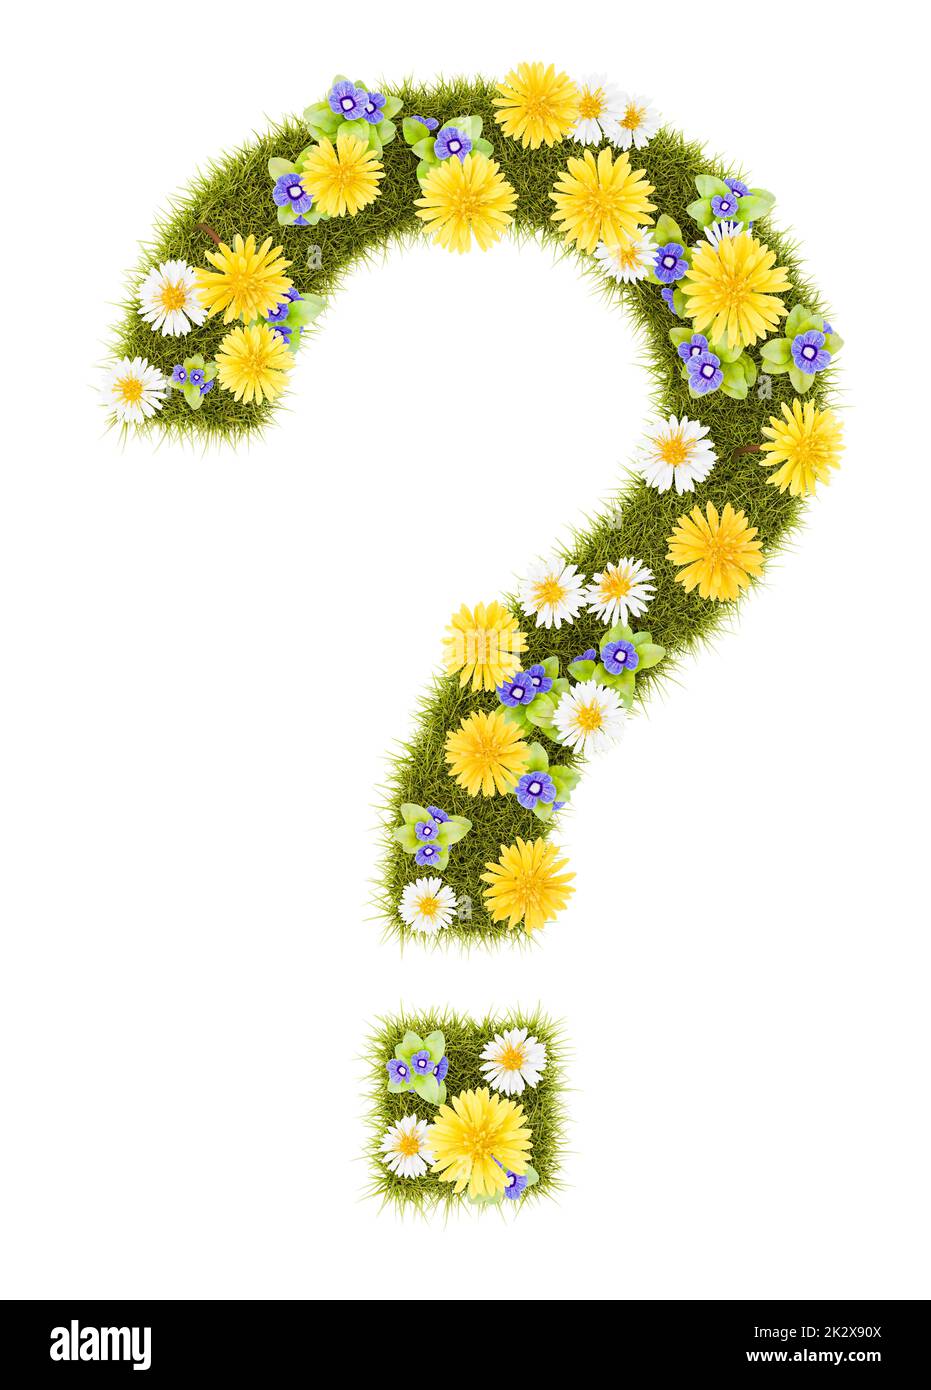 Flowery Grassy Question Mark Shape Isolated Stock Photo